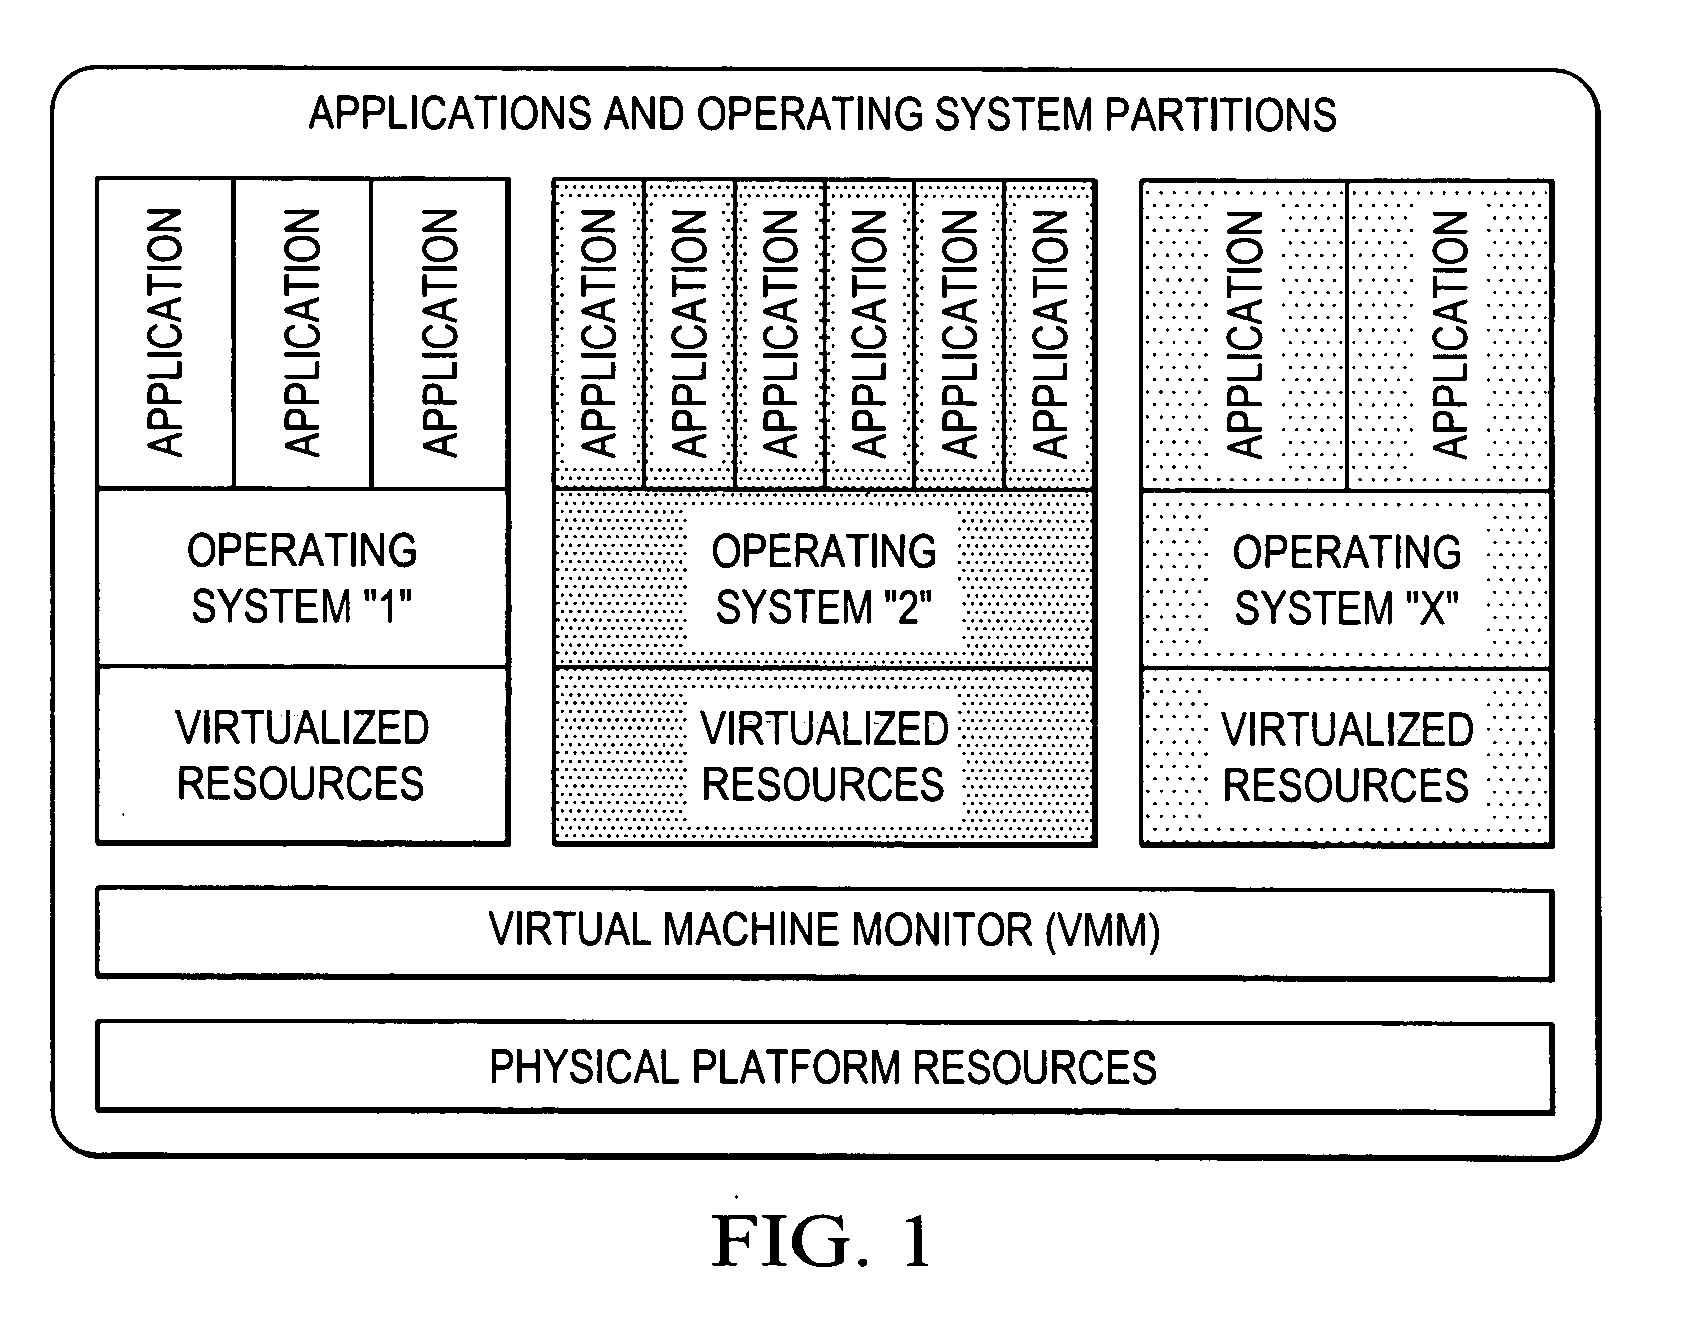 Virtualization of a host computer's native I/O system architecture via the internet and LANs